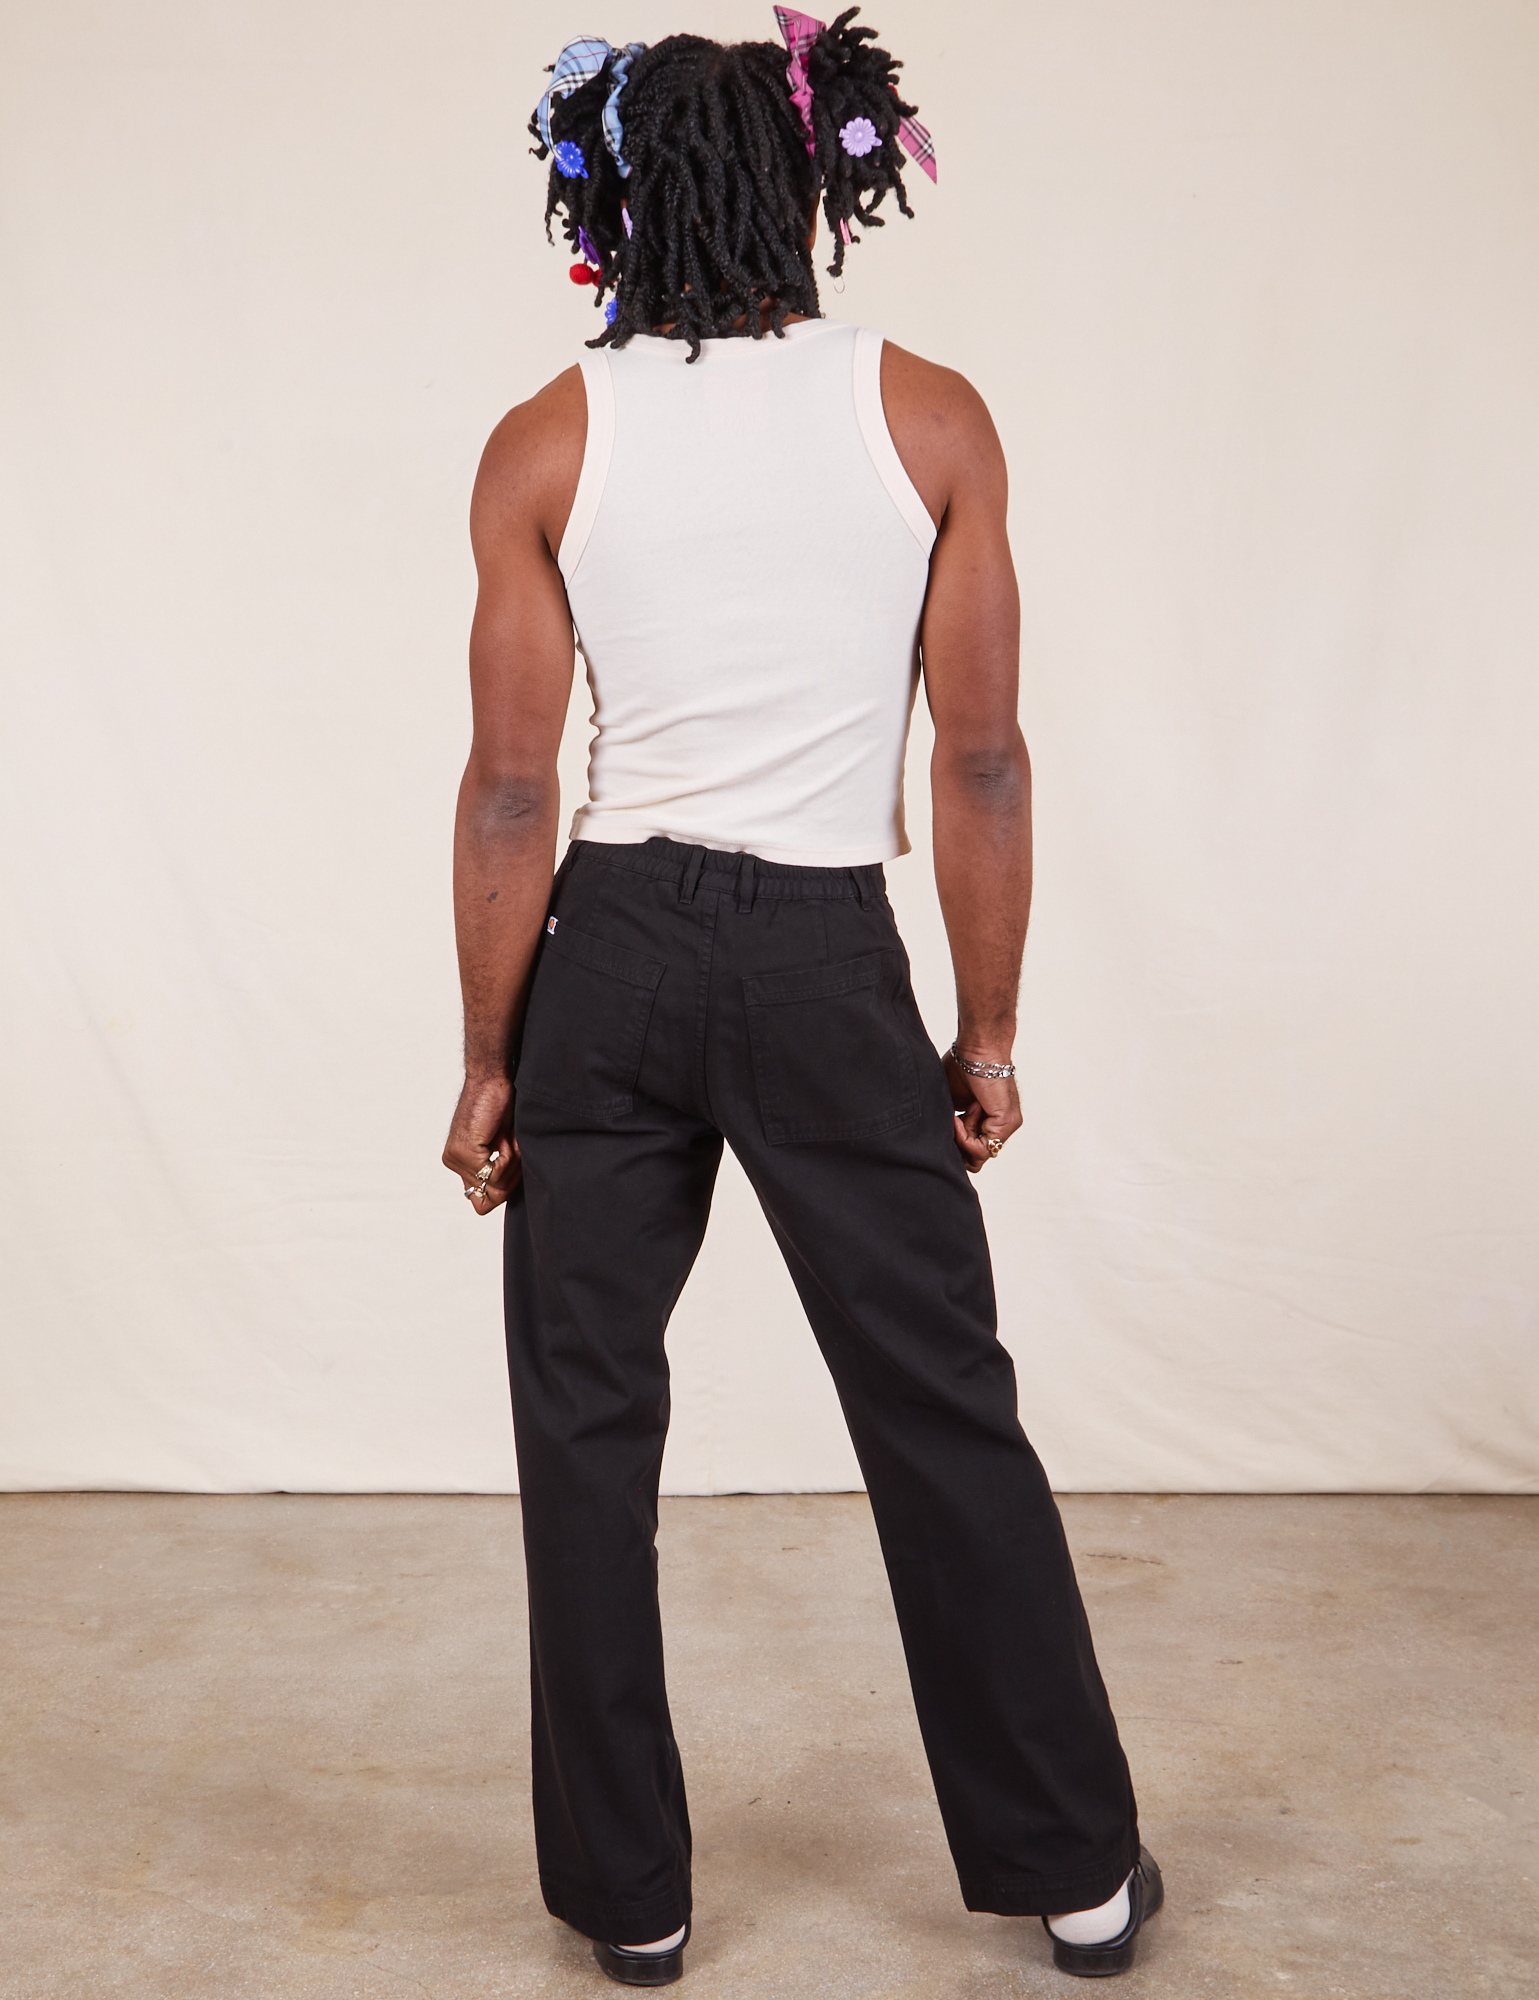 Back view of Western Pants in Basic Black and vintage off-white Tank Top on Jerrod